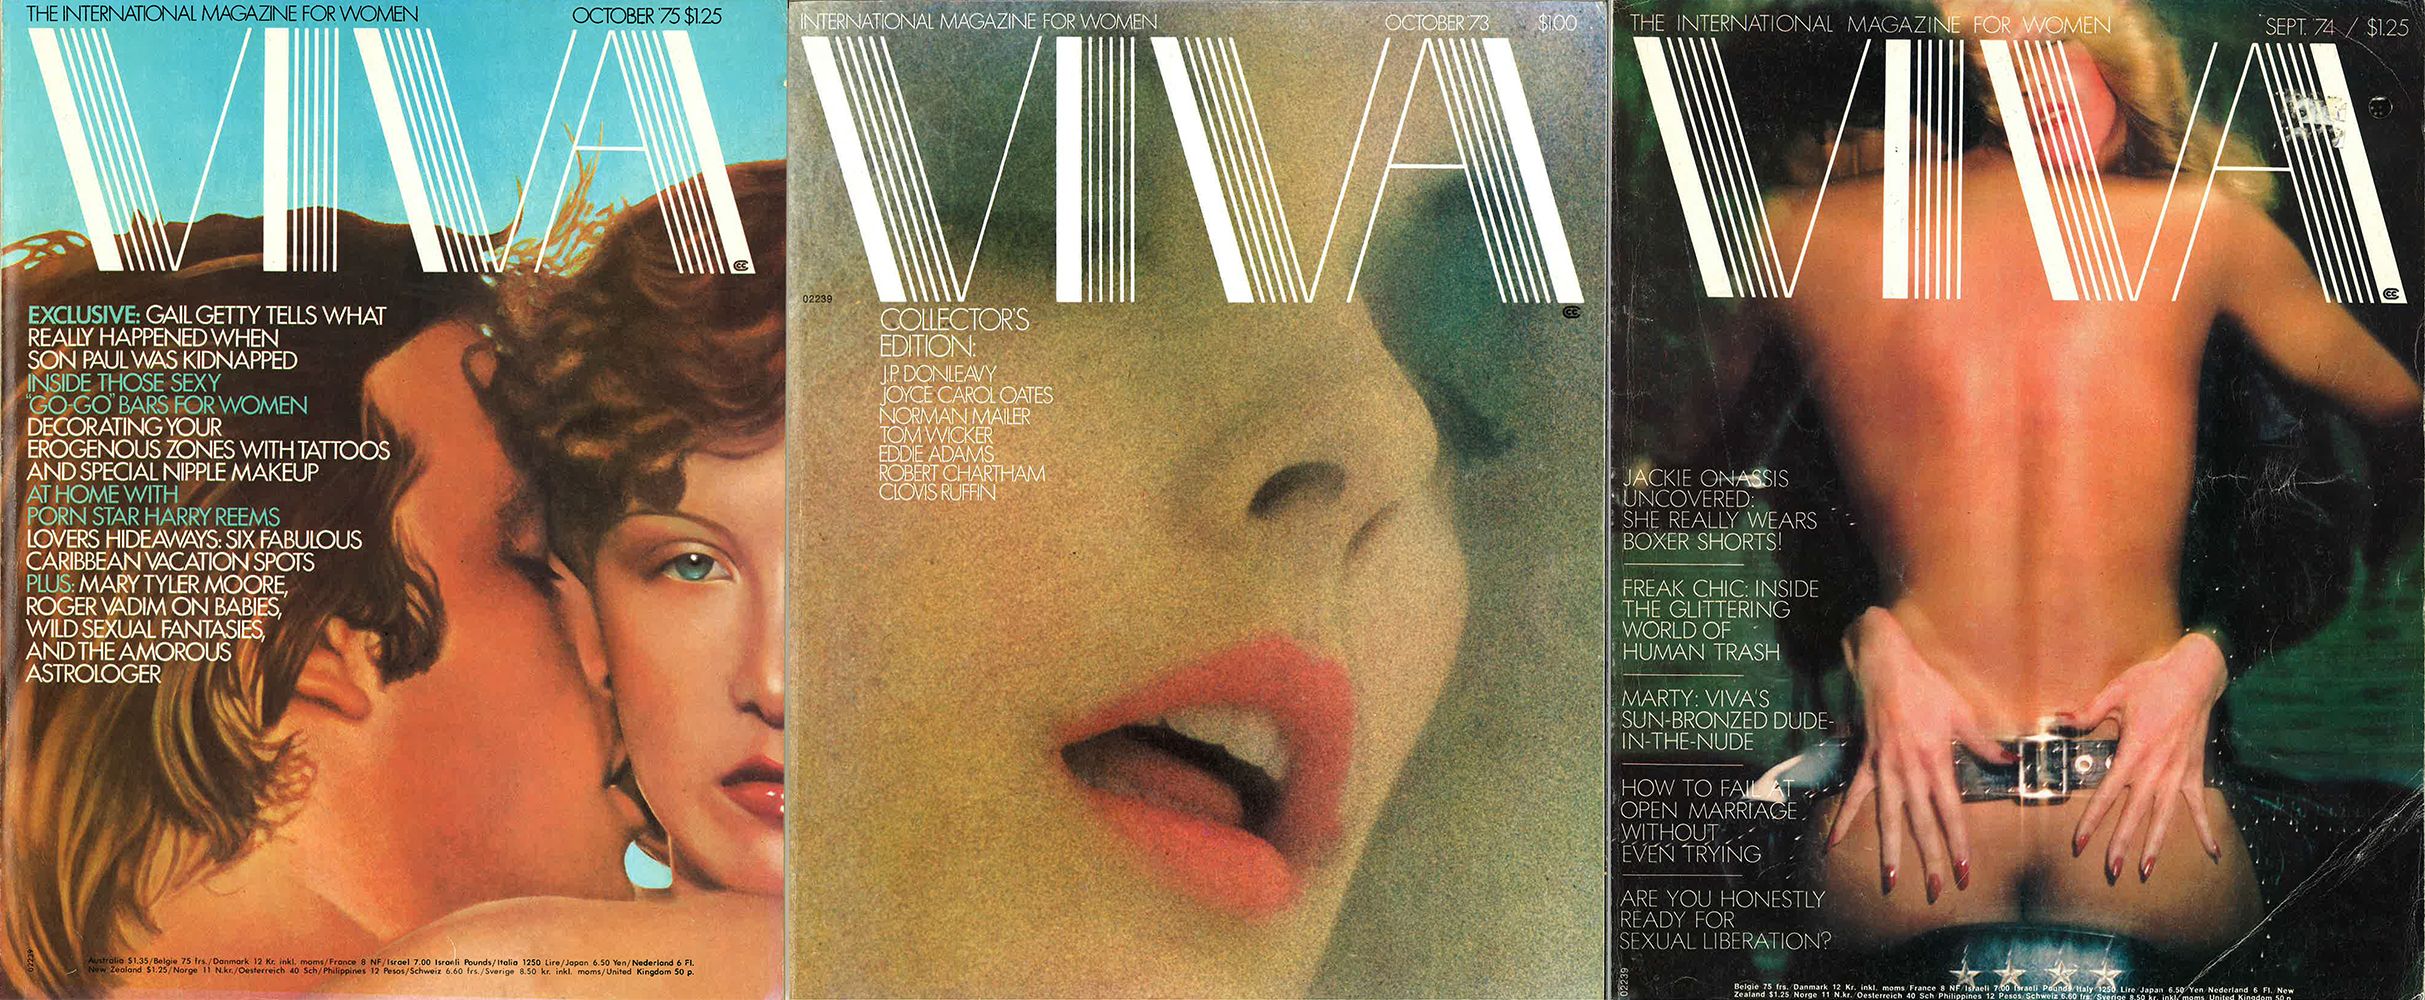 1970s Magazines - An Oral History of Viva, the '70s Porn Magazine for Women